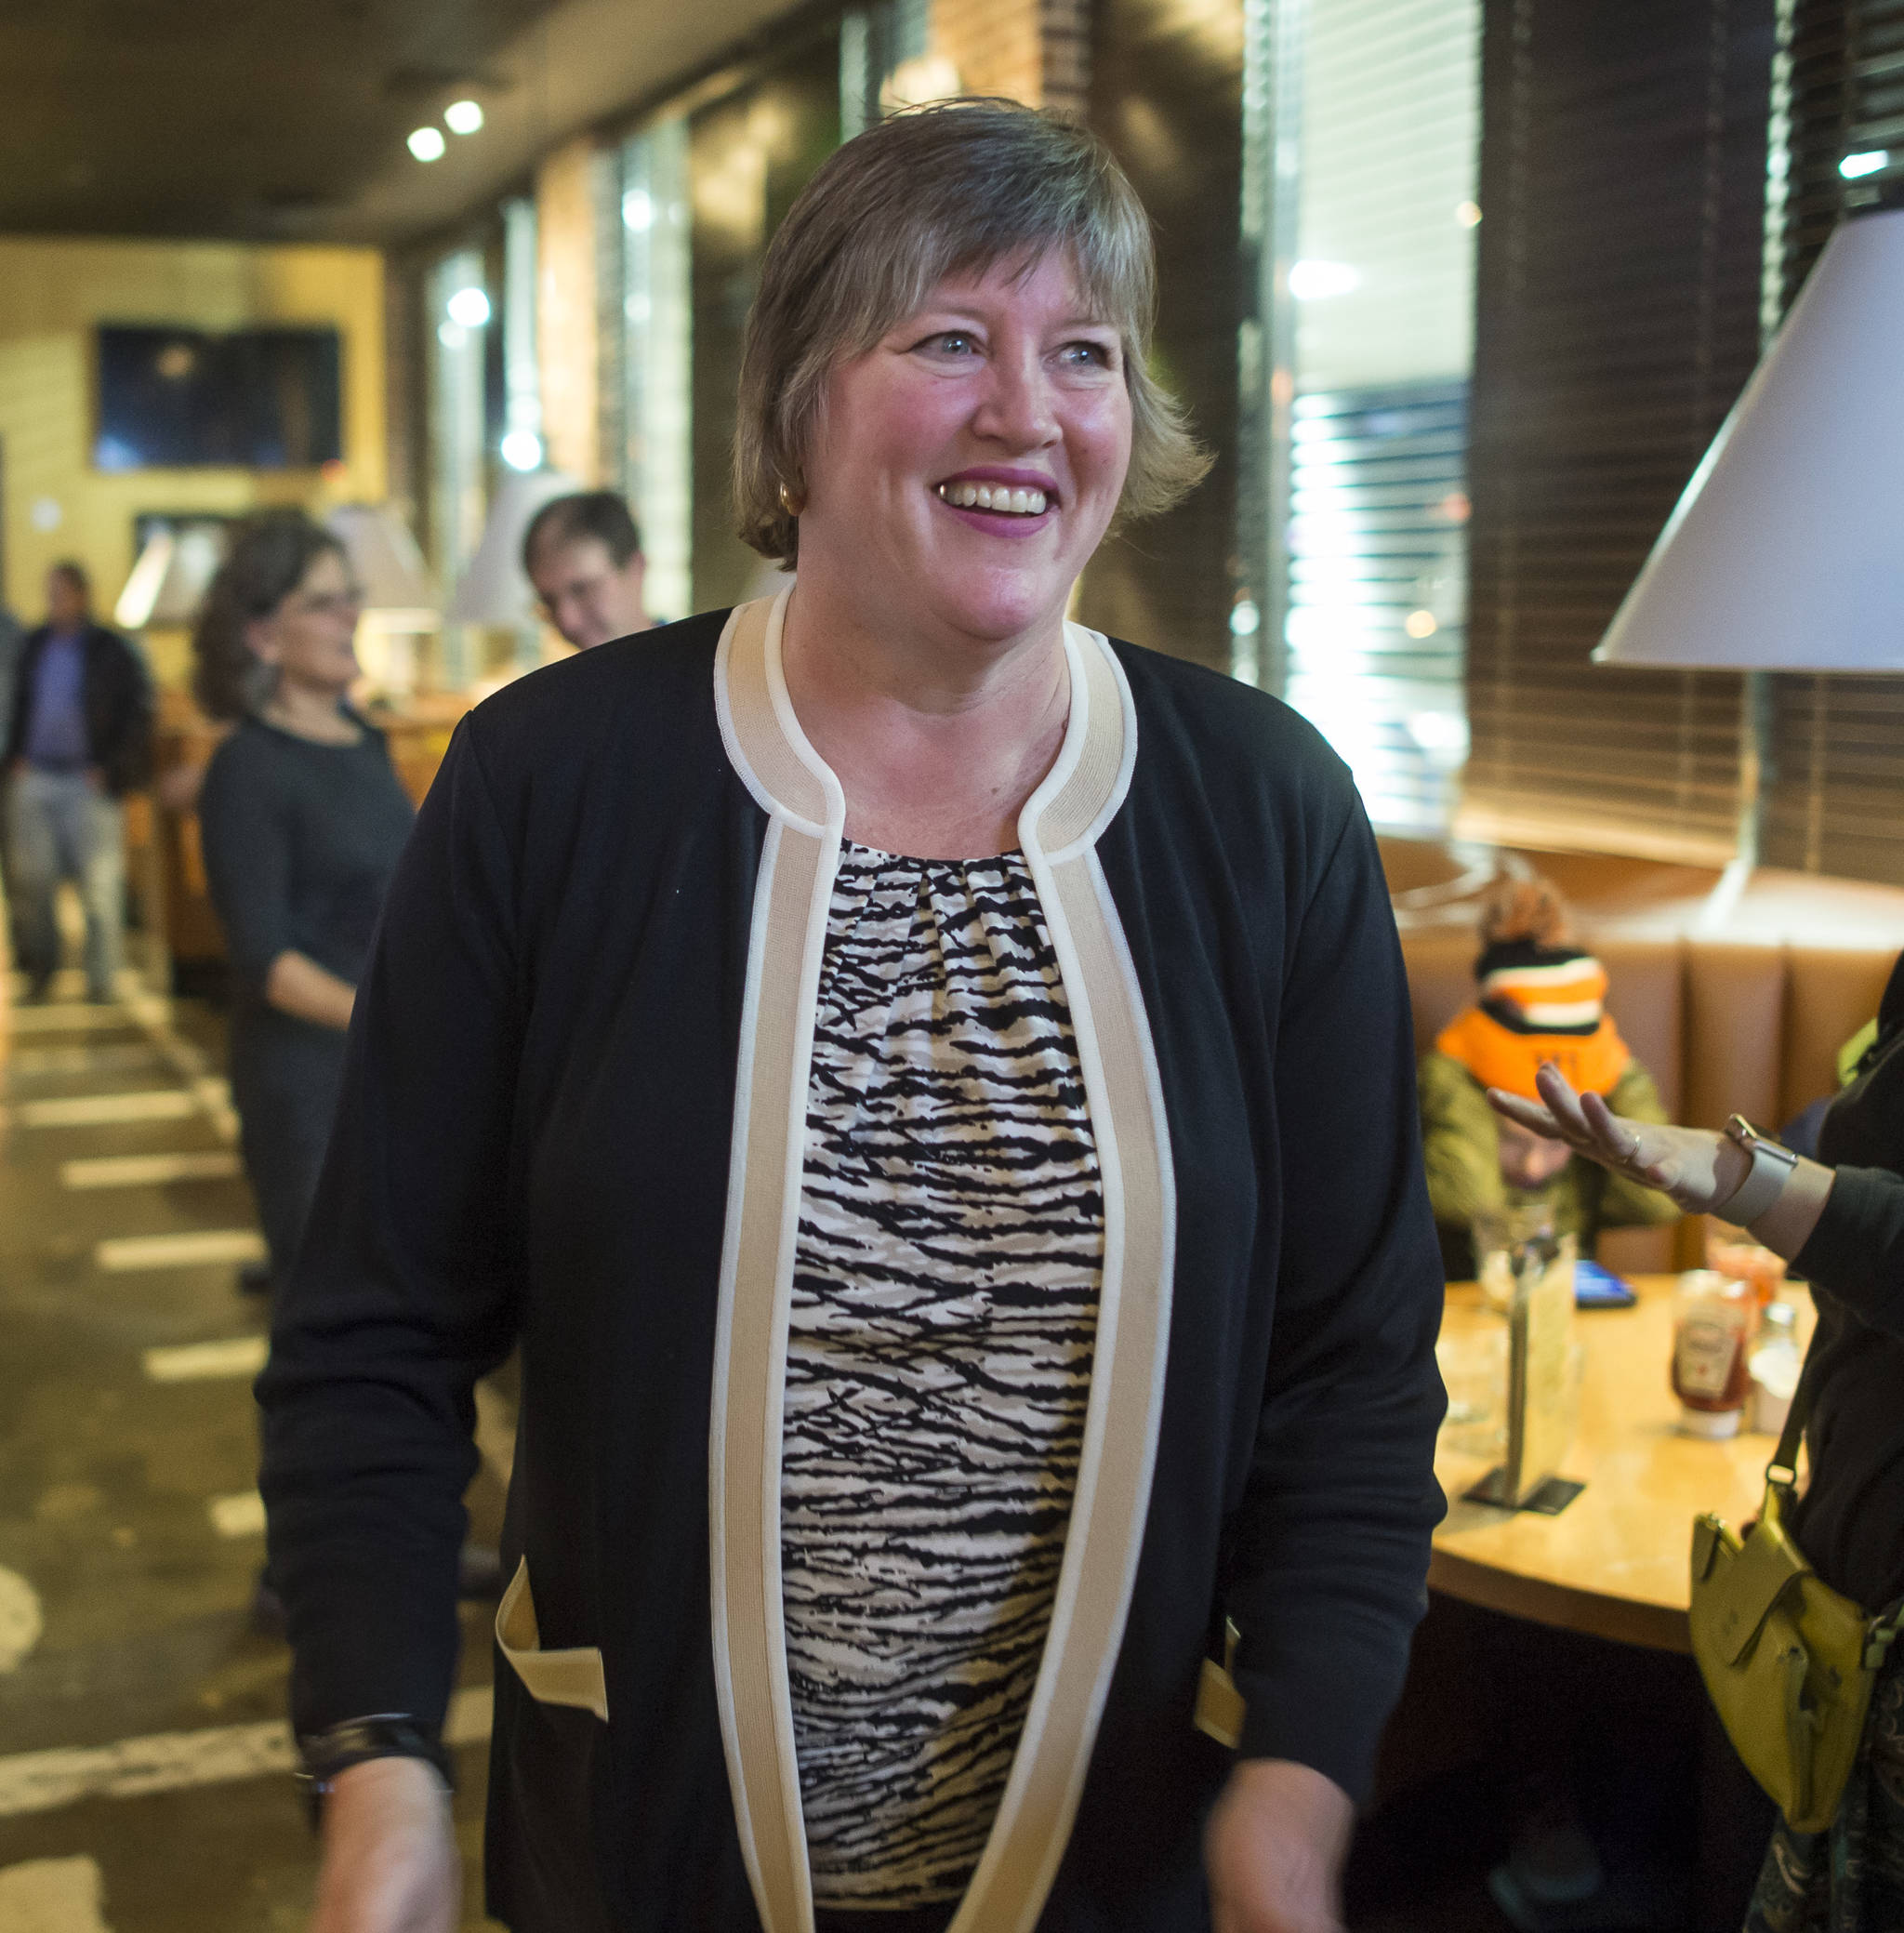 Sara Hannan, Democratic candidate for House Distric 33, walks into McGiveny’s Sports Bar and Grill on election night. Hannan won her race over independent candidate Chris Dimond. (Michael Penn | Juneau Empire)